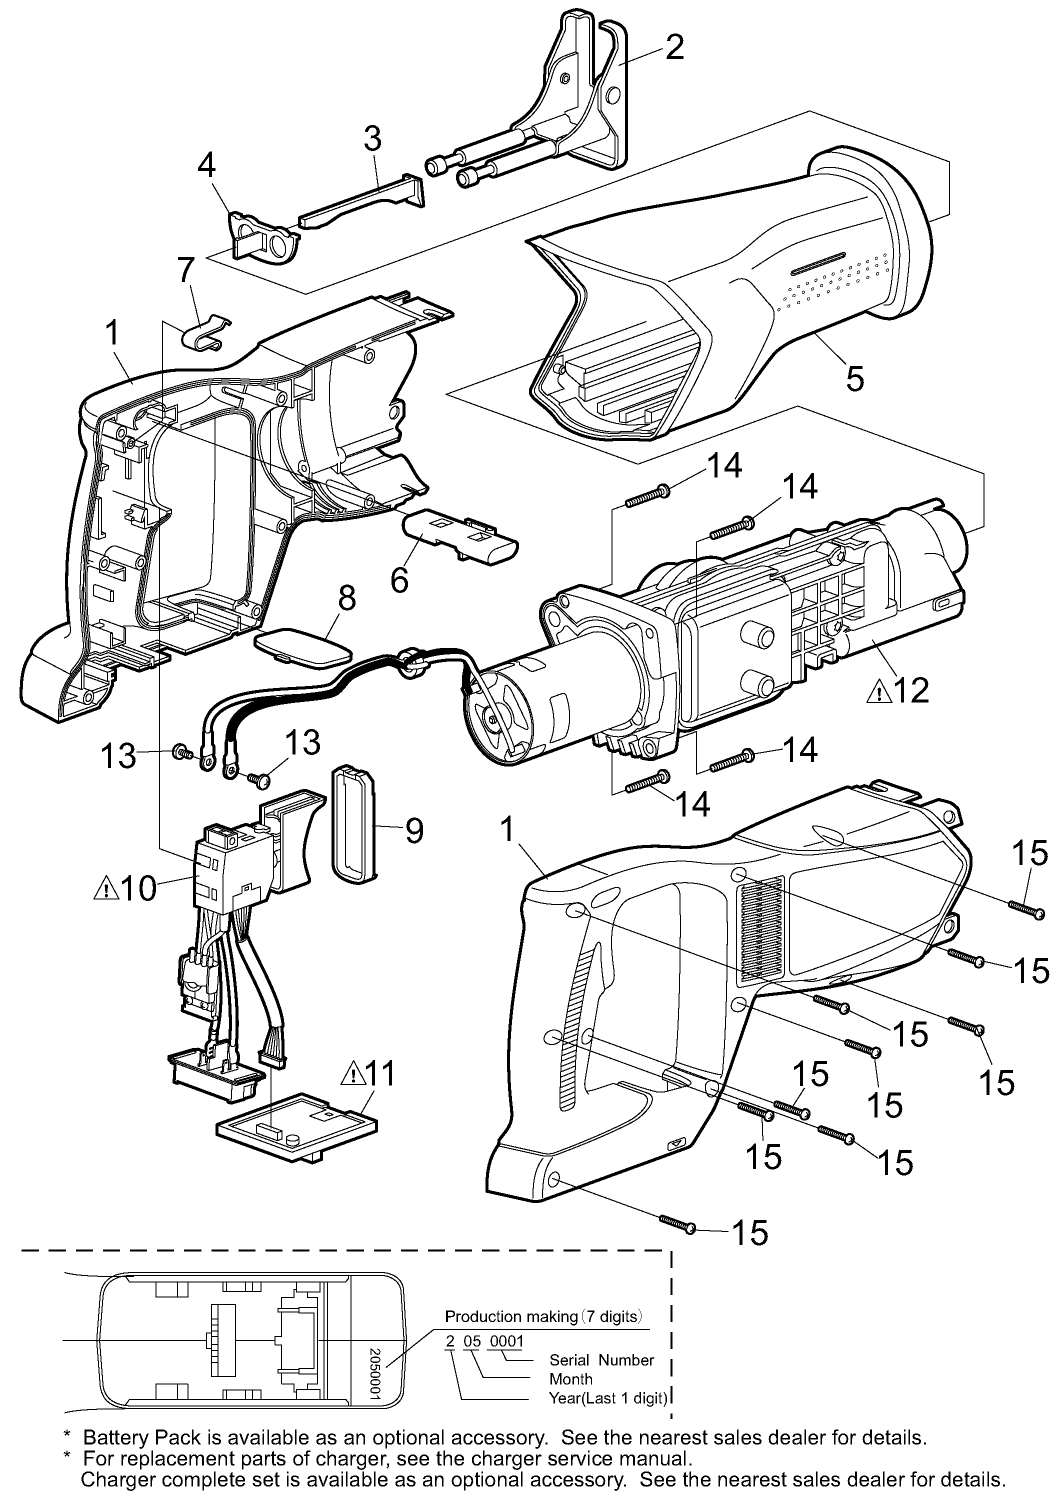 EY45A1: Exploded View